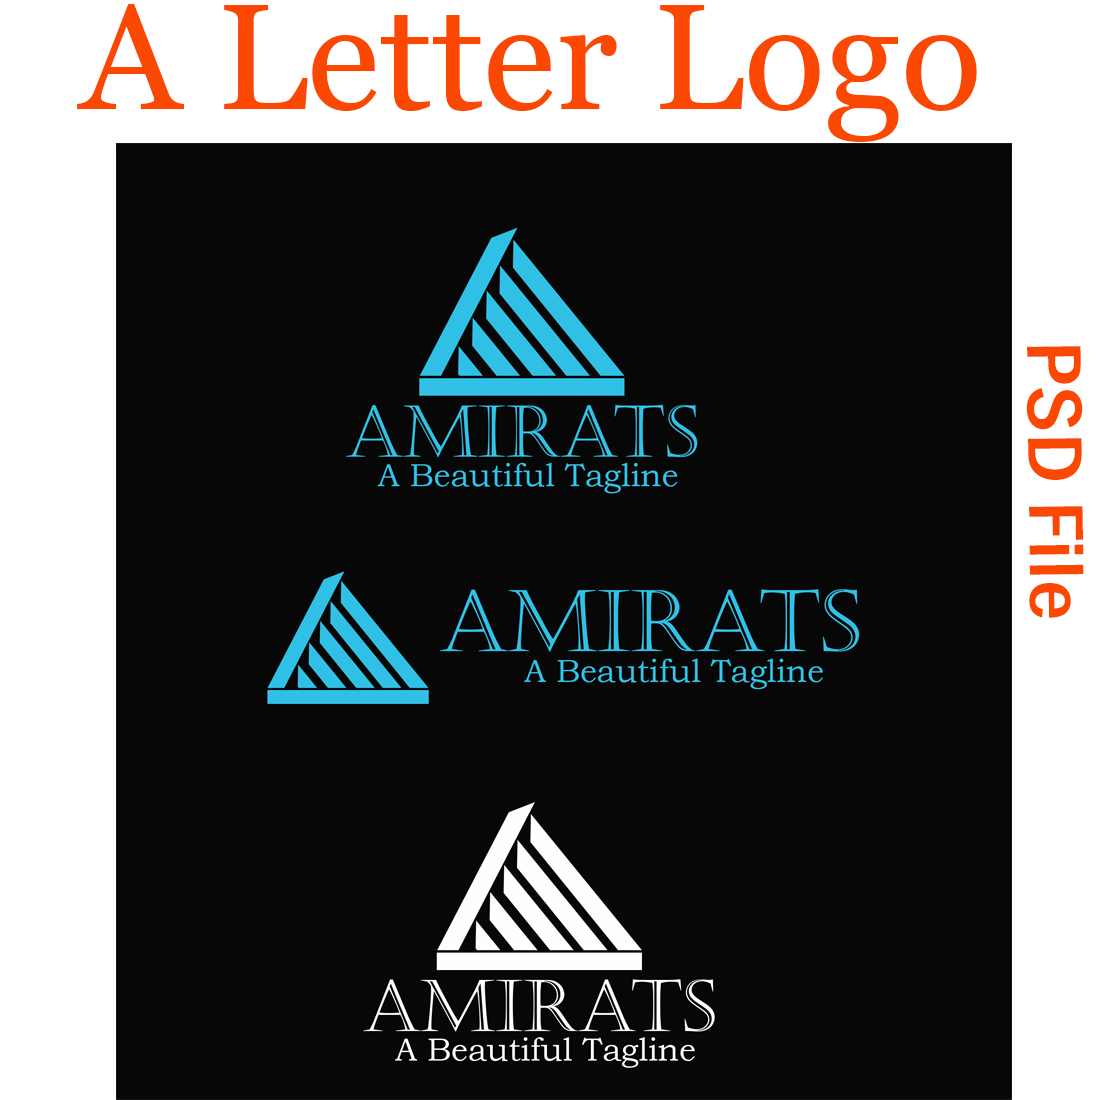 Letter A Logo Template cover image.